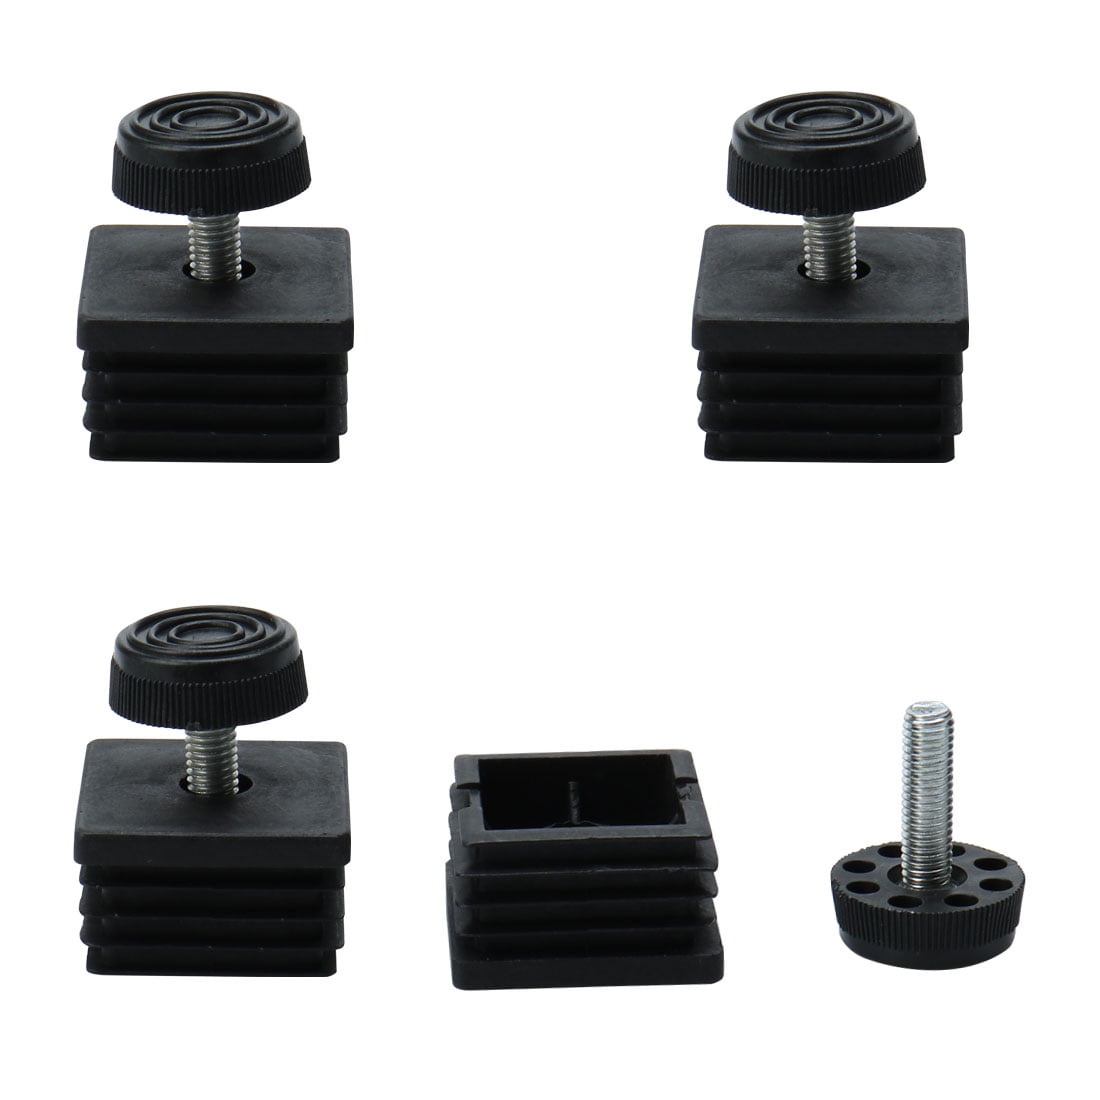 4 X ADJUSTABLE FEET/FOOT INSERTS FOR 40mm SQUARE END TUBE LEGS STRONG PLASTIC 